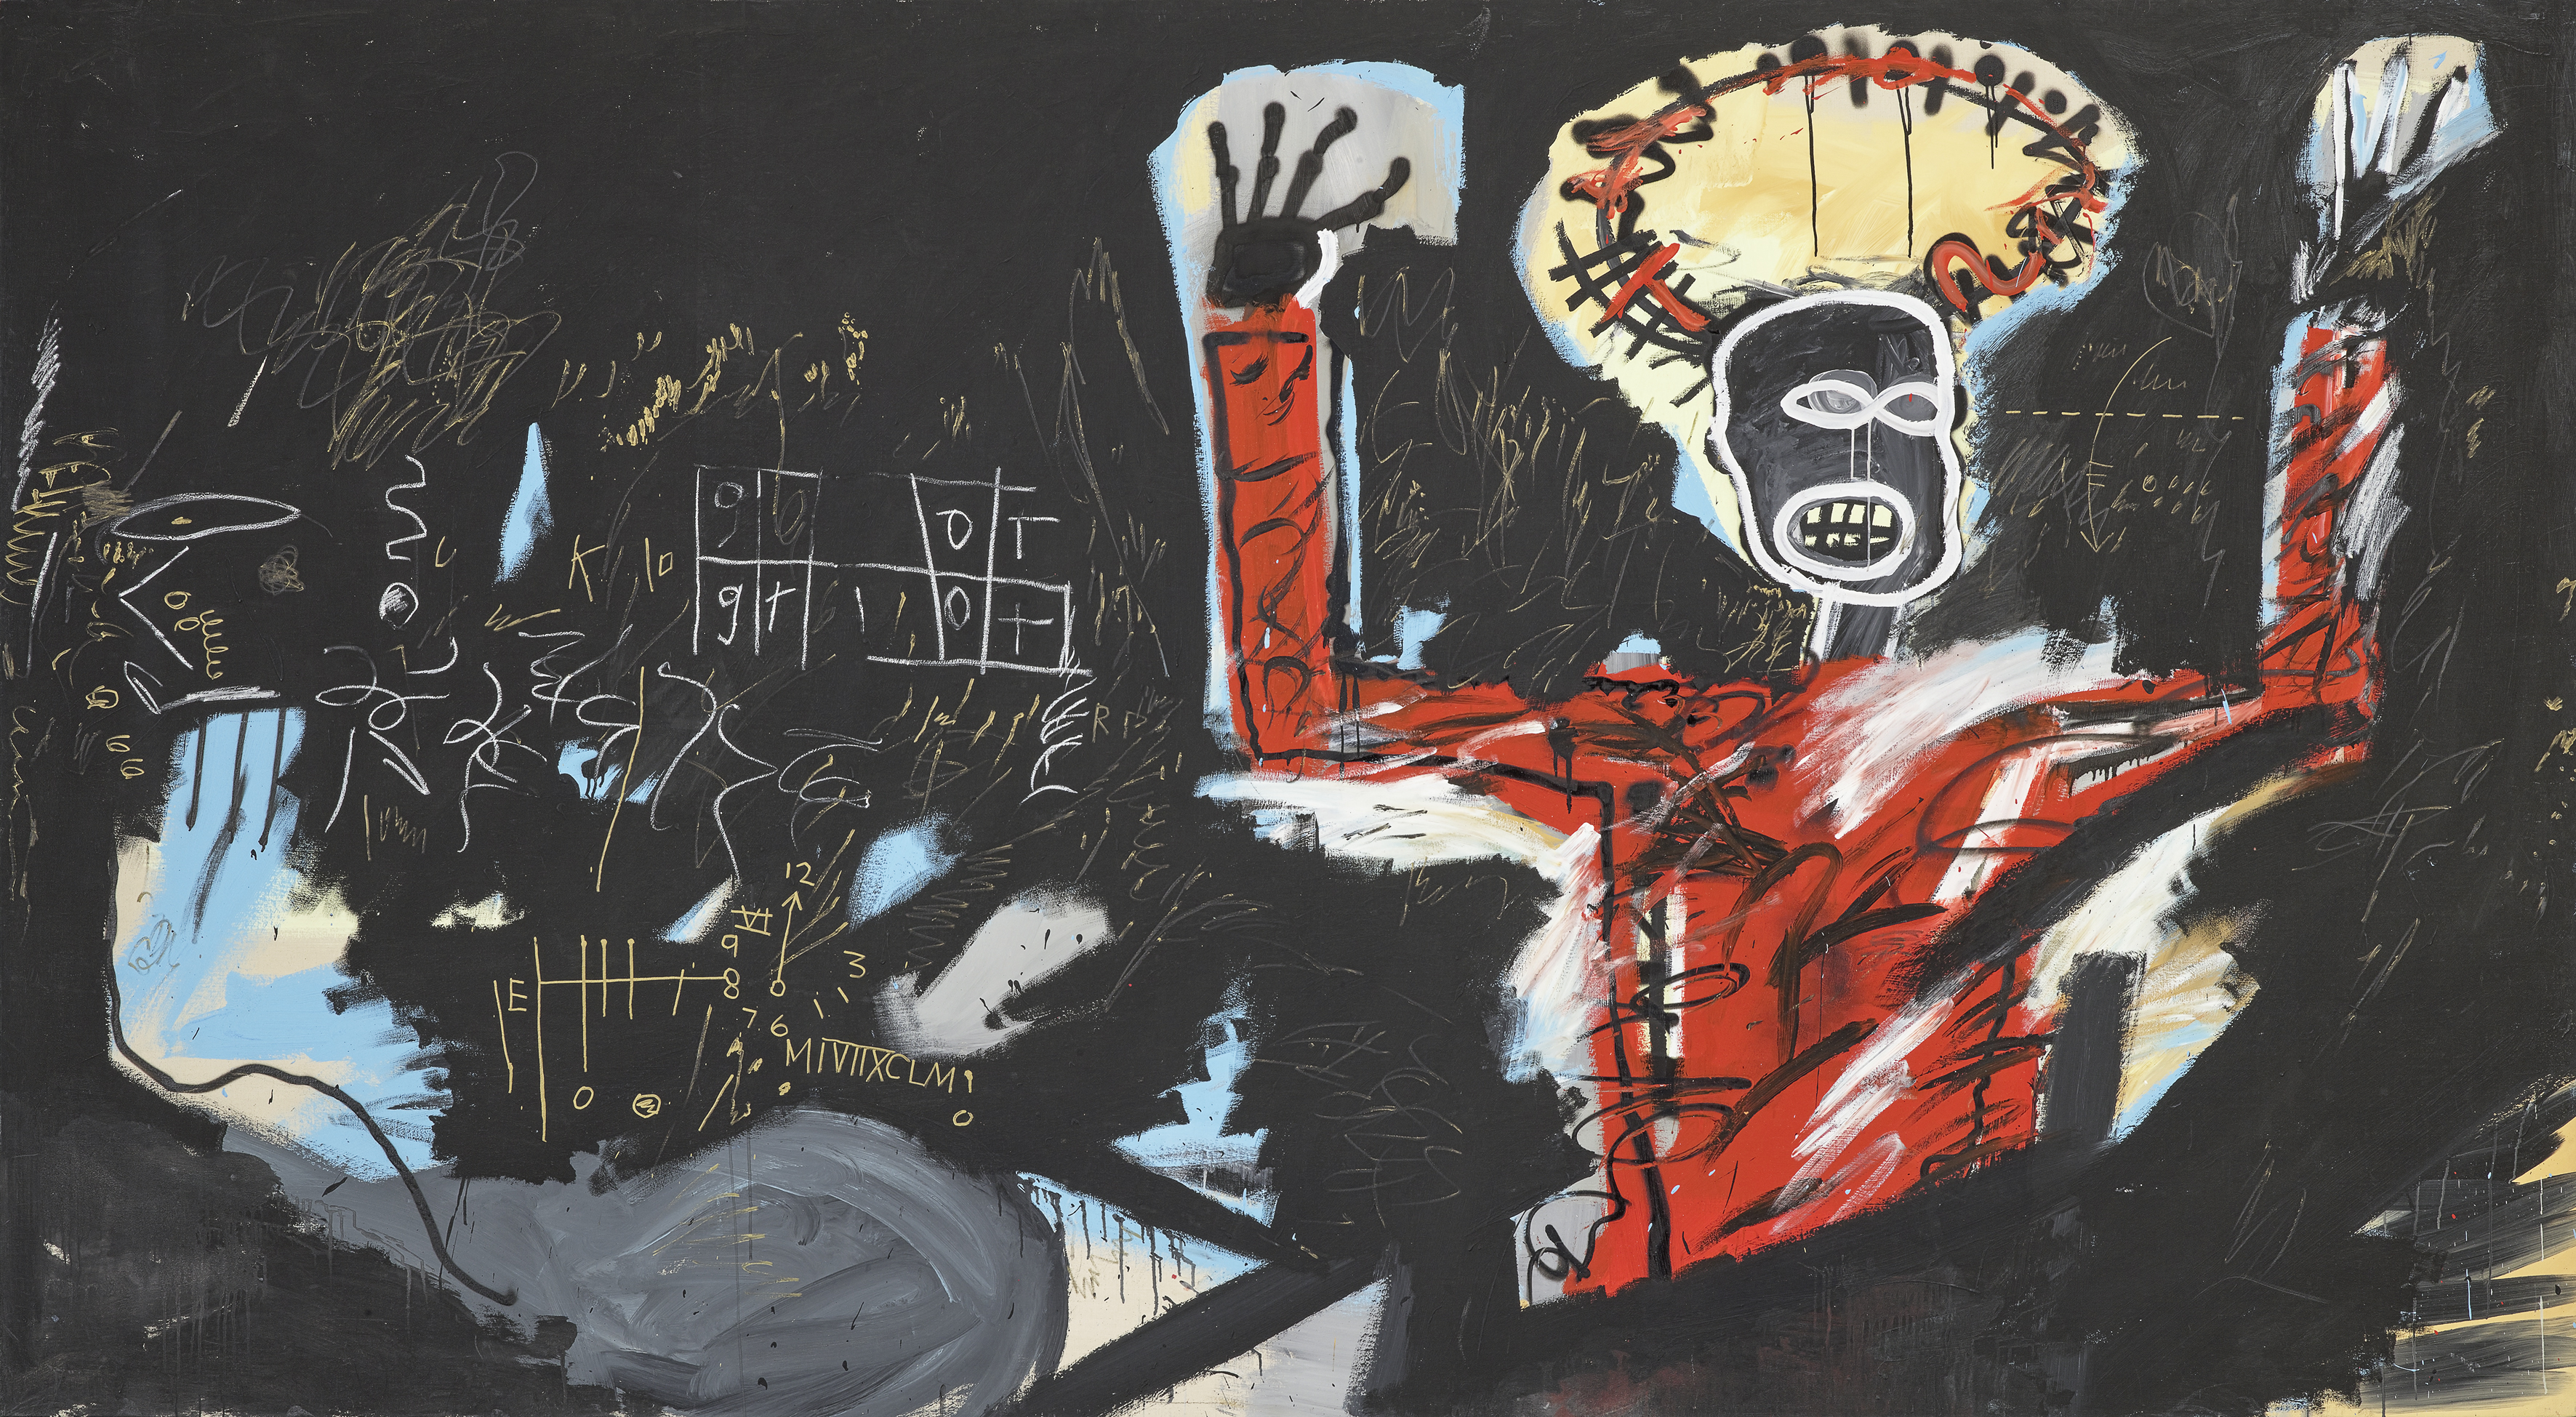 JEAN-MICHEL BASQUIAT, PROFIT 1, 1982 Acrylic, oil stick, marker, and spray paint on canvas, 220 x 400 cm Private Collection, Switzerland © Estate of Jean-Michel Basquiat. Licensed by Artestar, New York Photo: Robert Bayer